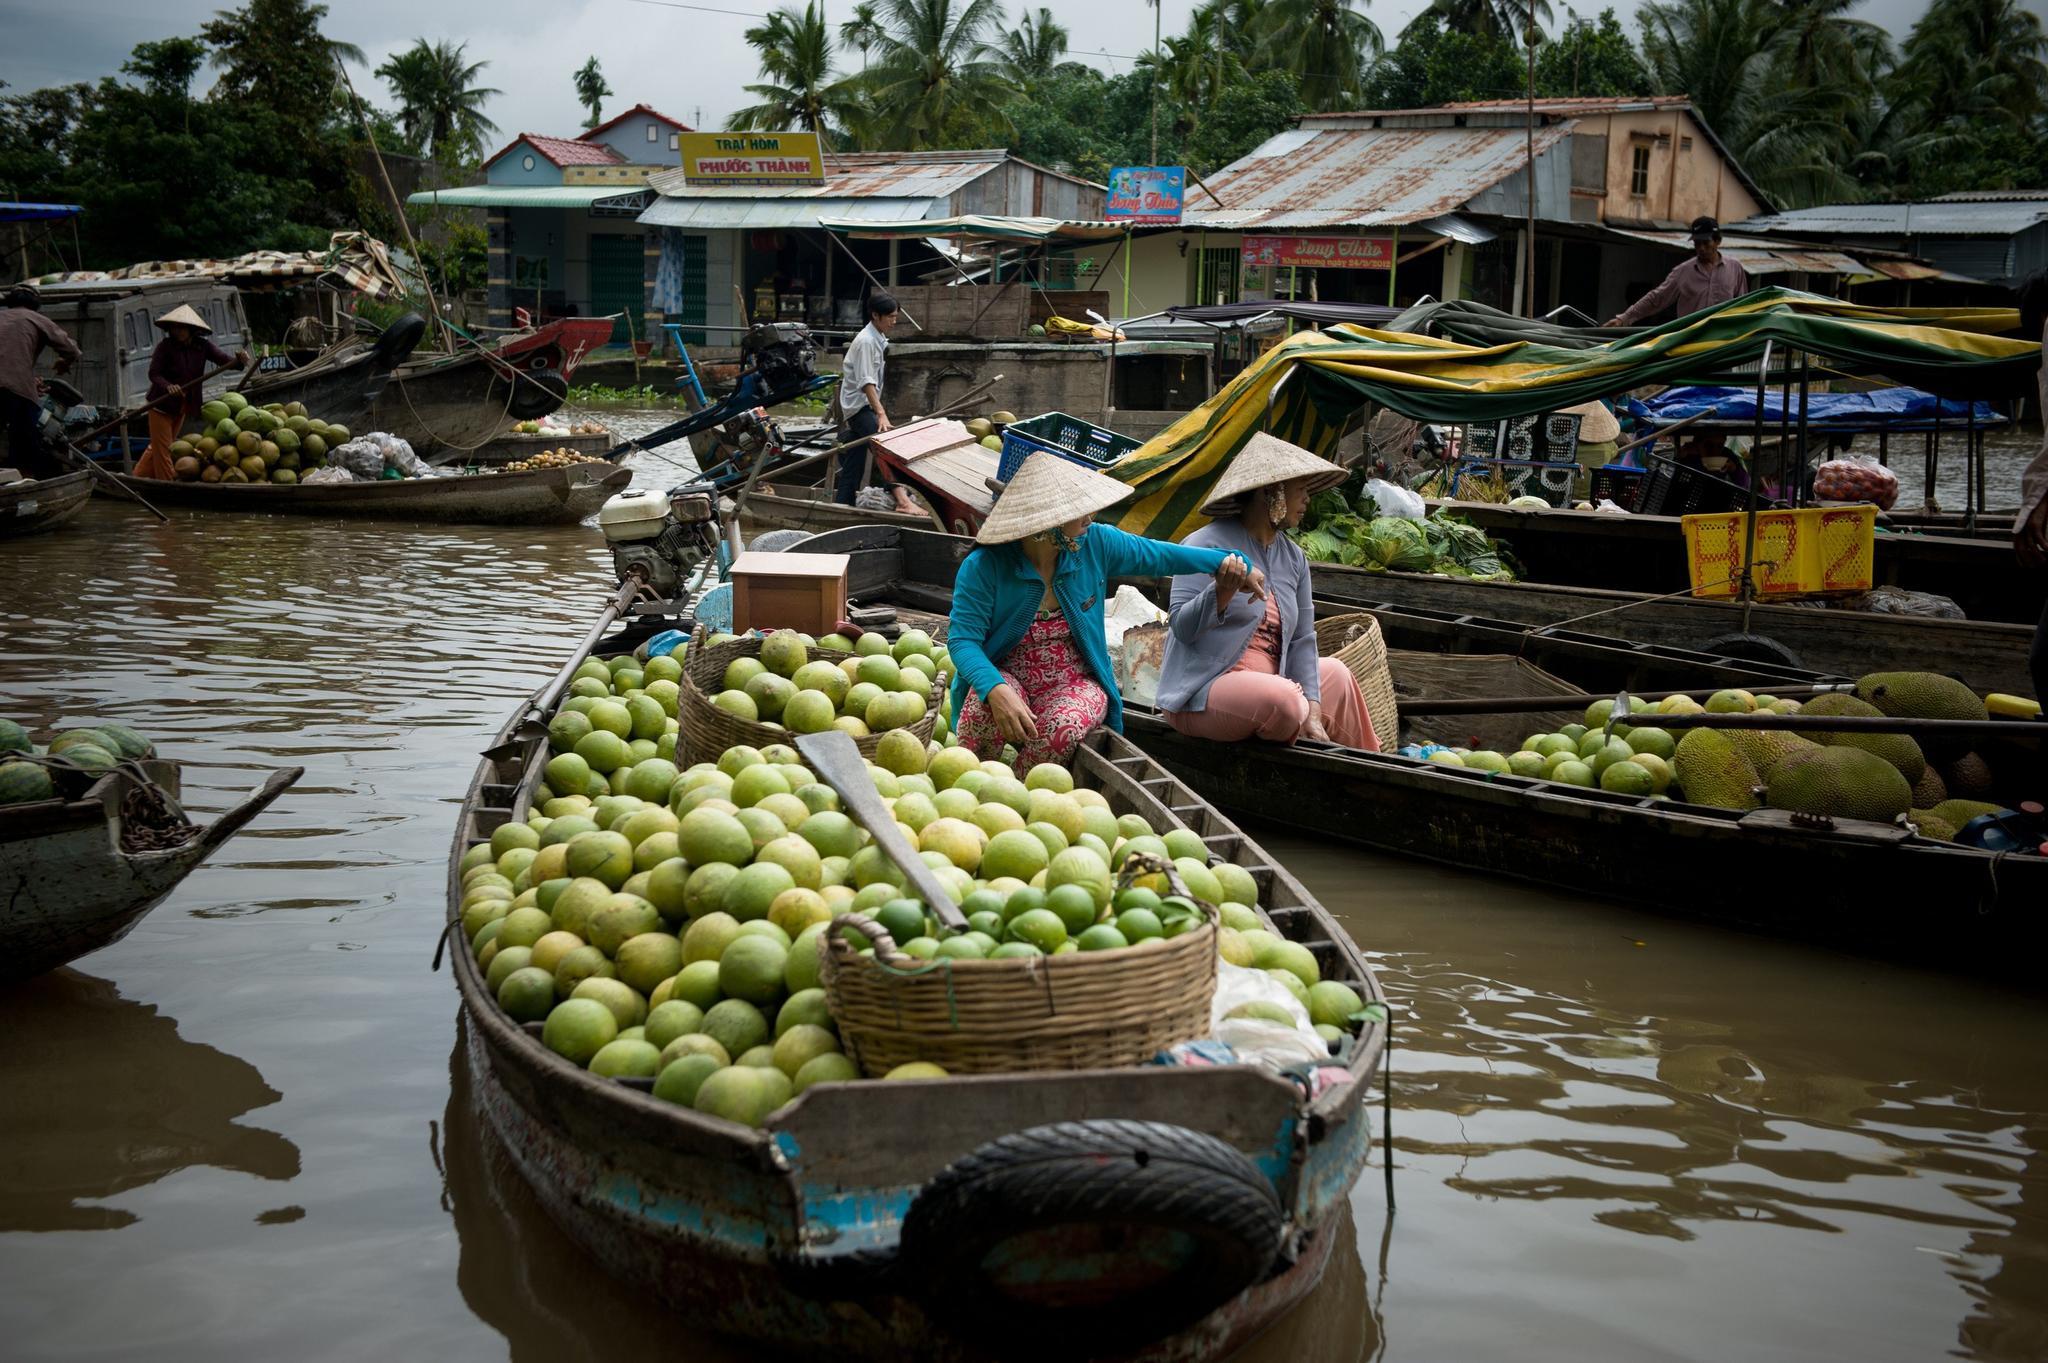 Boats filled with produce such as mangoes and jackfruit floating on a river. Women are seen on the boats selling the produce.